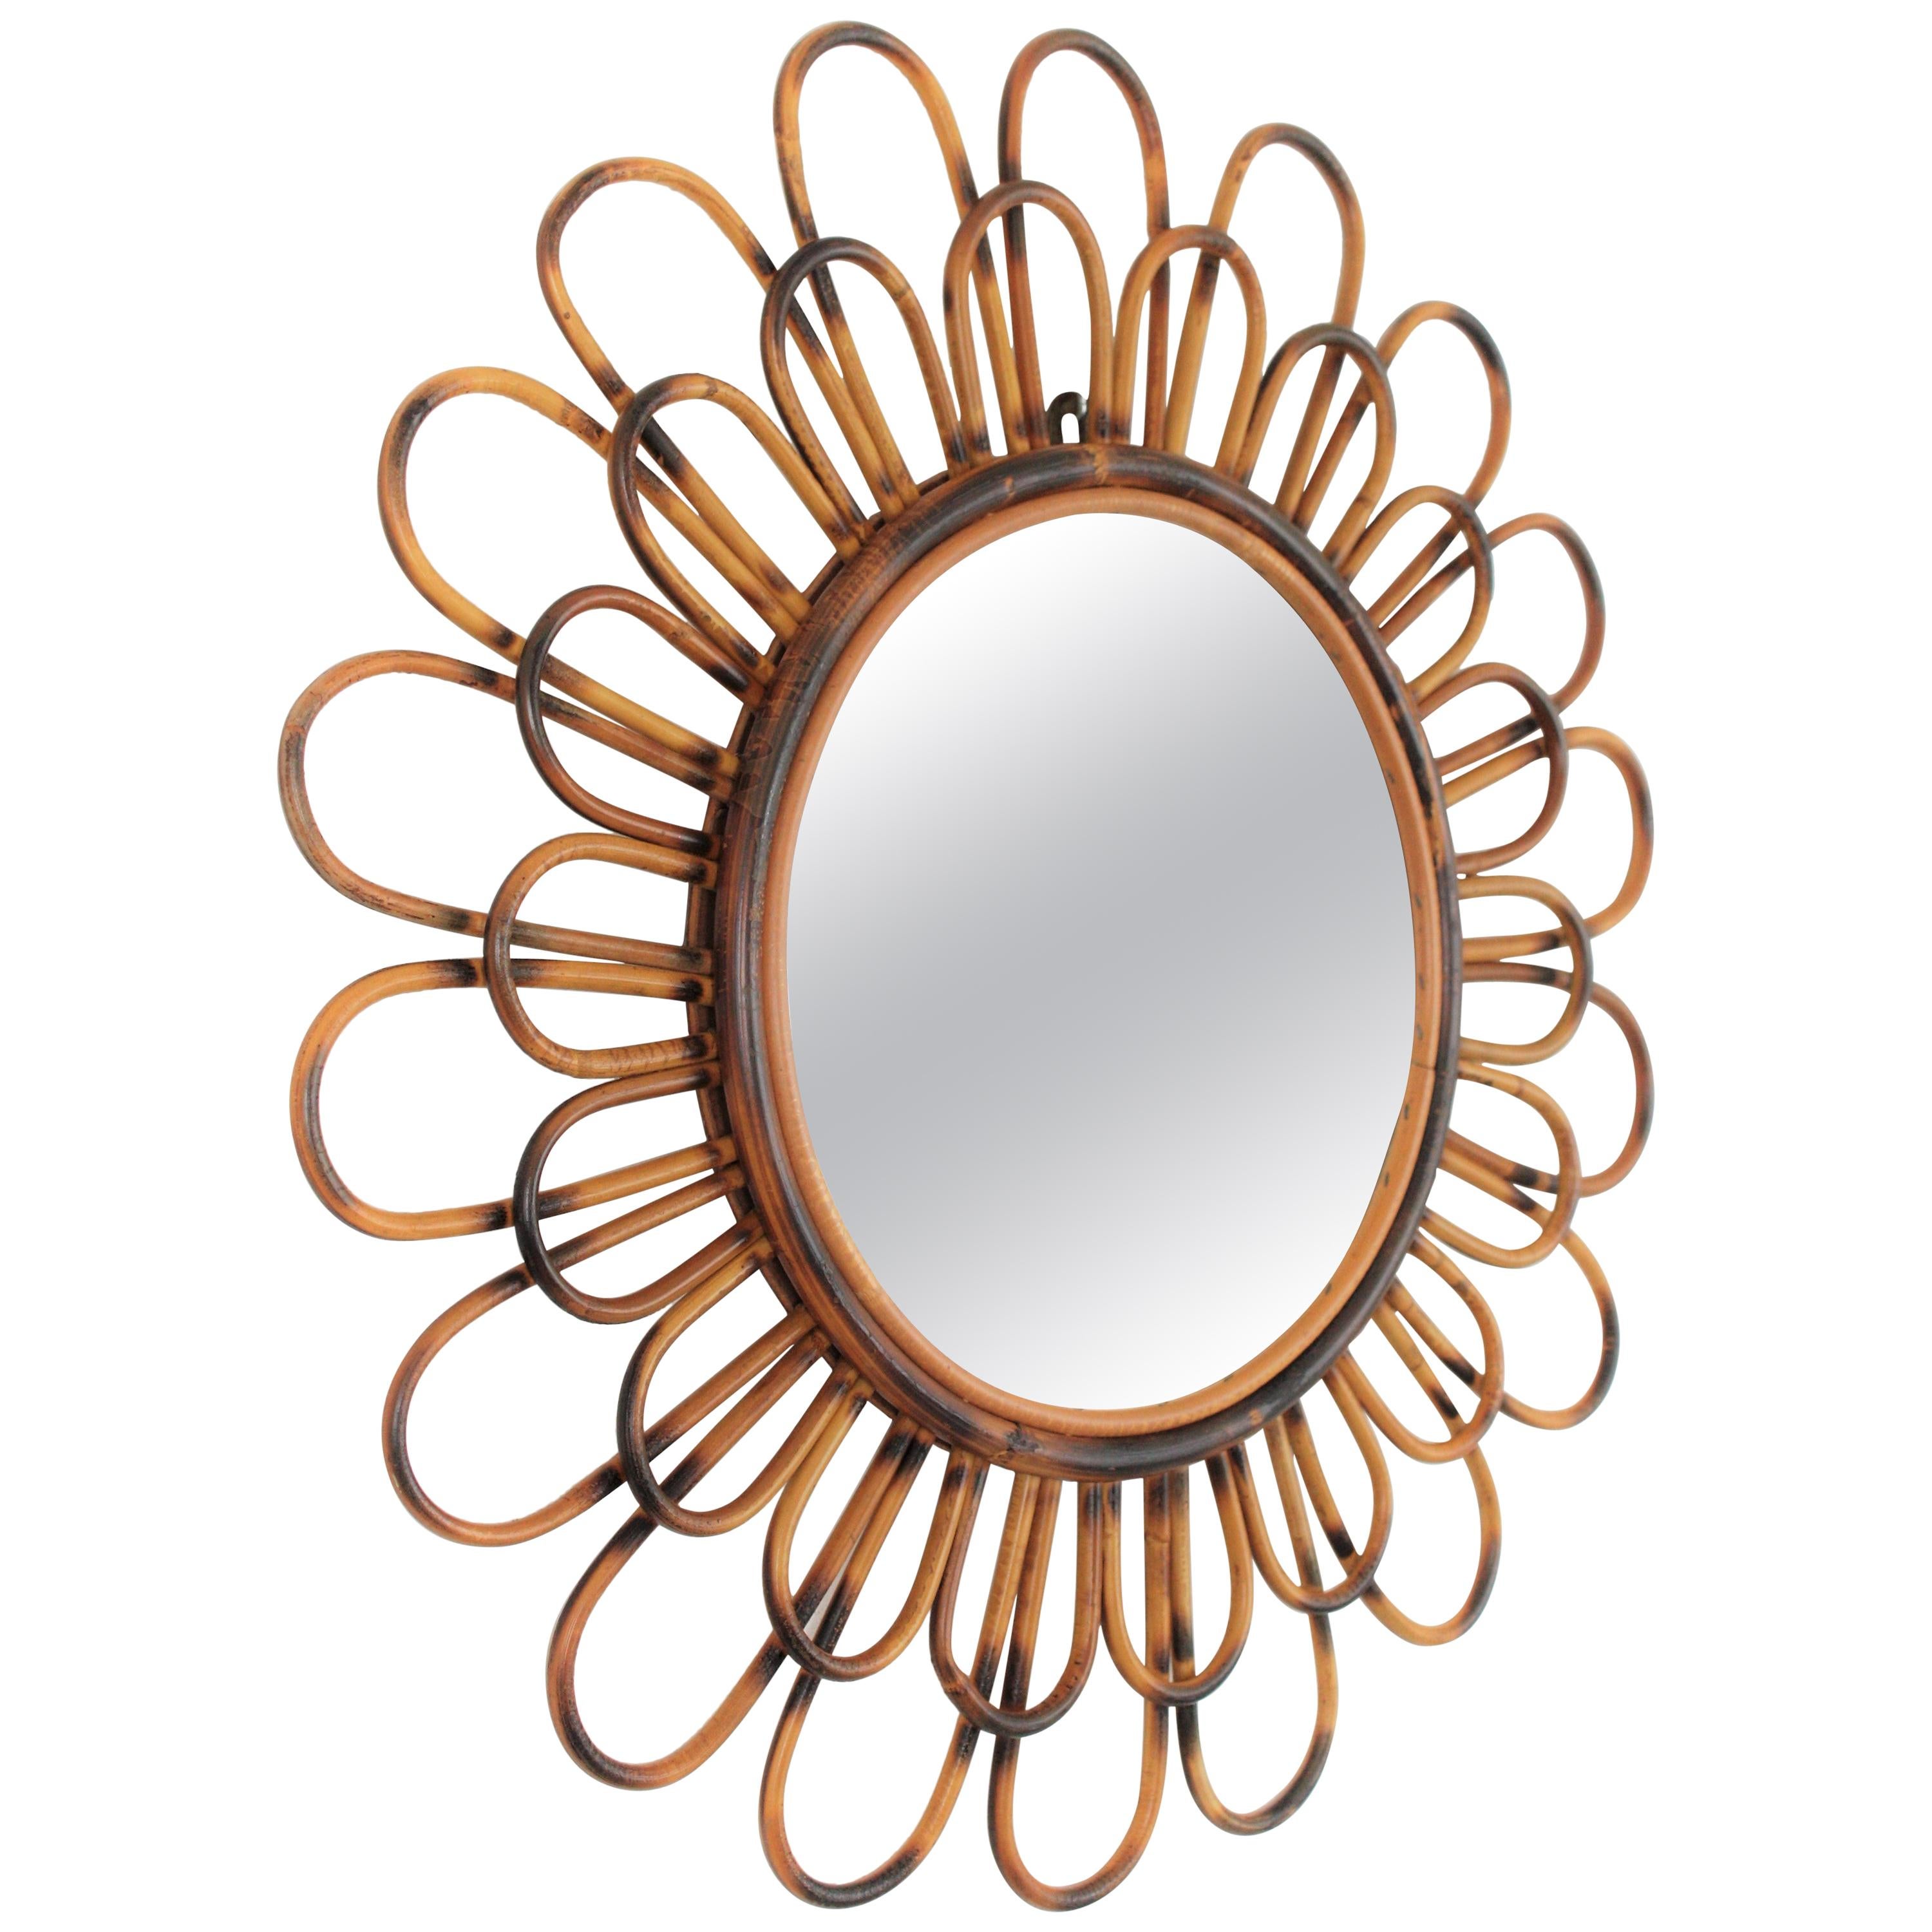 Double Layered Rattan Sunburst Flower Shaped Mirror. France, 1960s.
A lovely Mediterranean style handcrafted rattan flower shaped mirror with two layers of petals in two sizes and pyrography accents. It has all the taste from the French